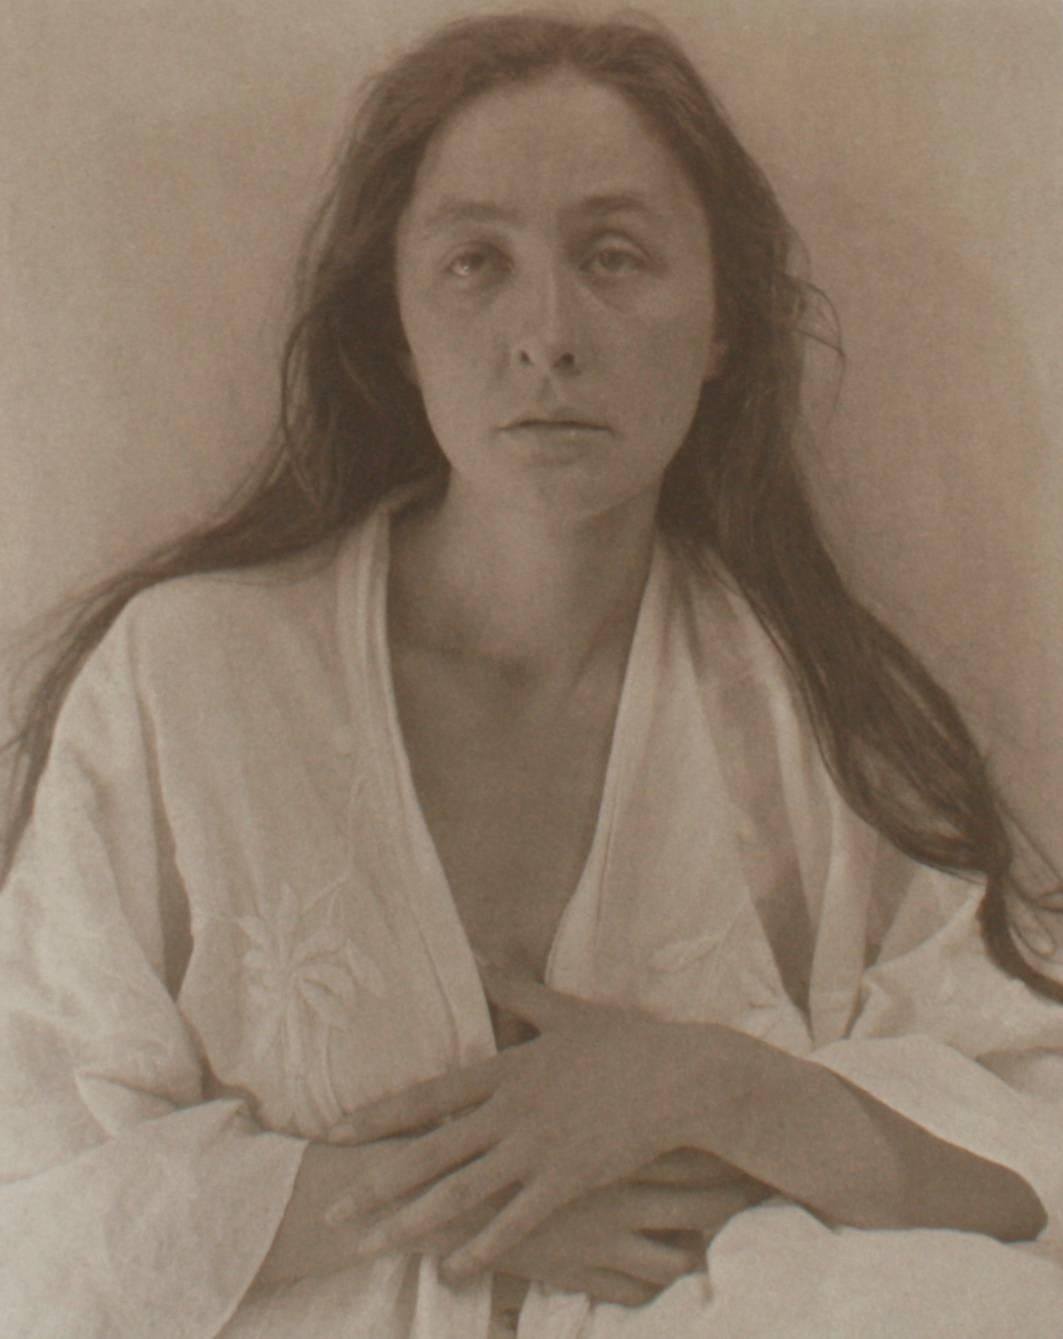 Georgia O'Keeffe, a portrait by Alfred Stieglitz and Georgia O'Keeffe. The Metropolitan Museum of Art / Viking Press, 1978. First edition hardcover with dust jacket. Master photographer Alfred Stieglitz's portraits of his wife, the well-known